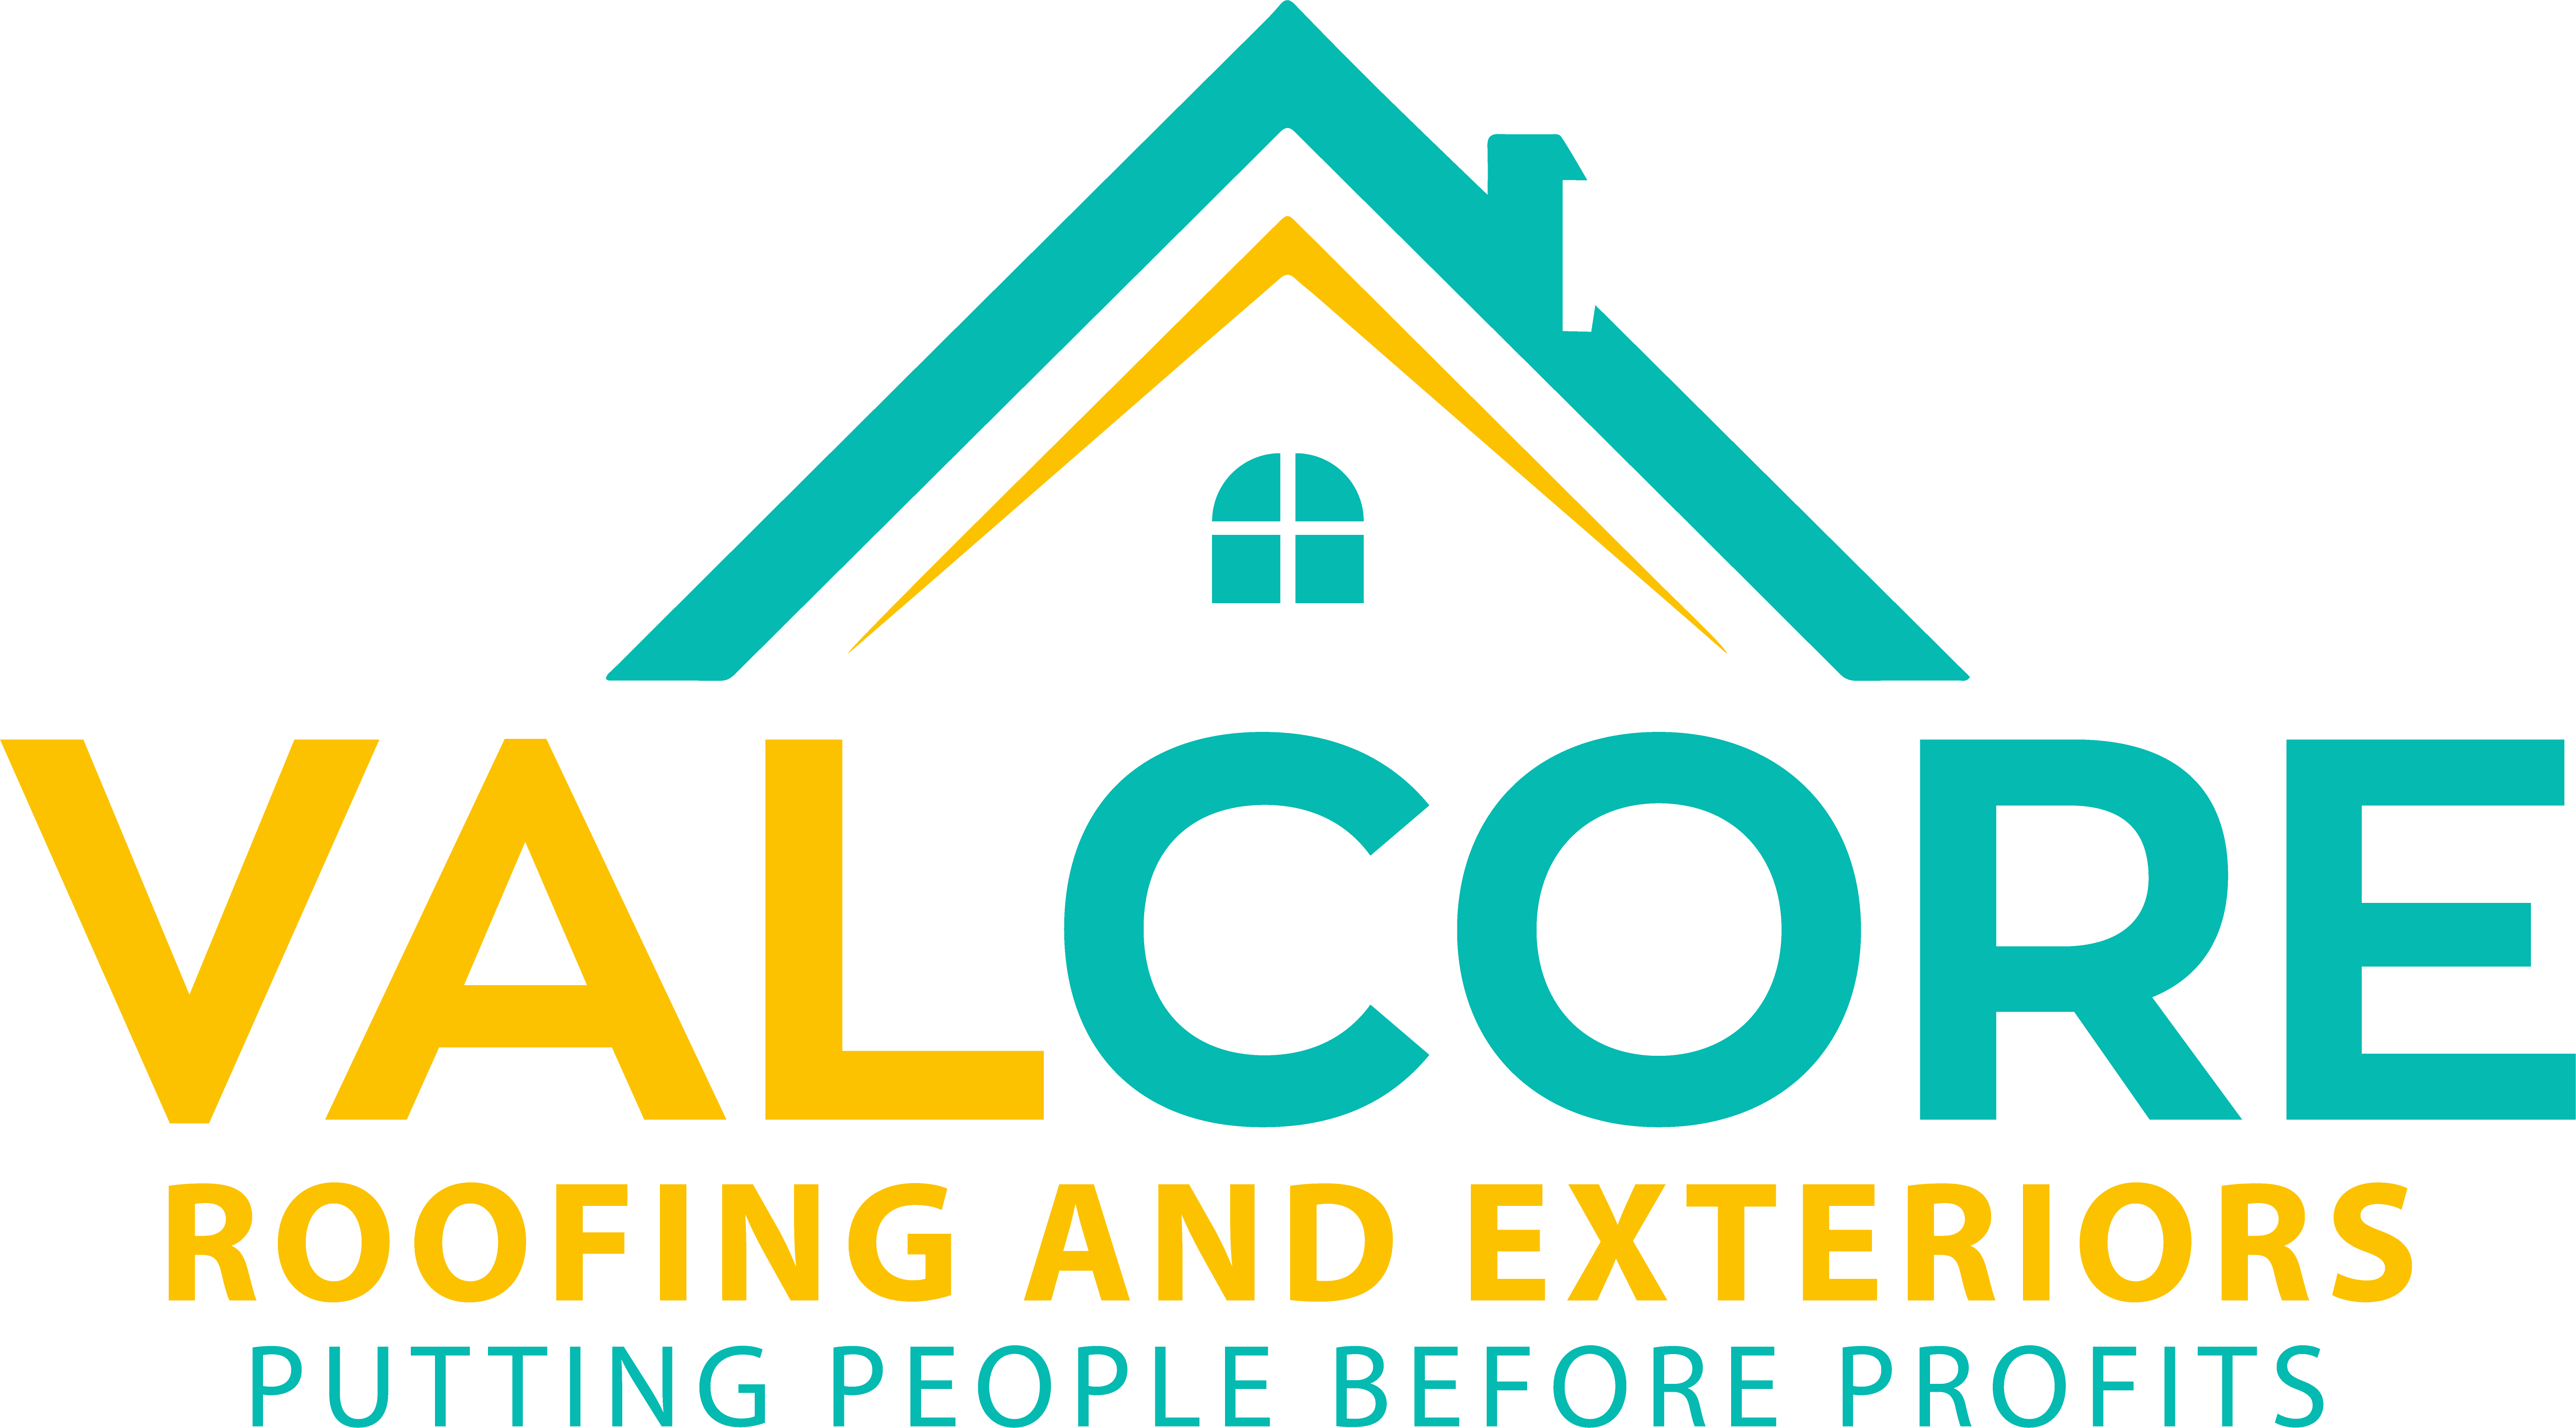 Valcore Roofing and Exteriors